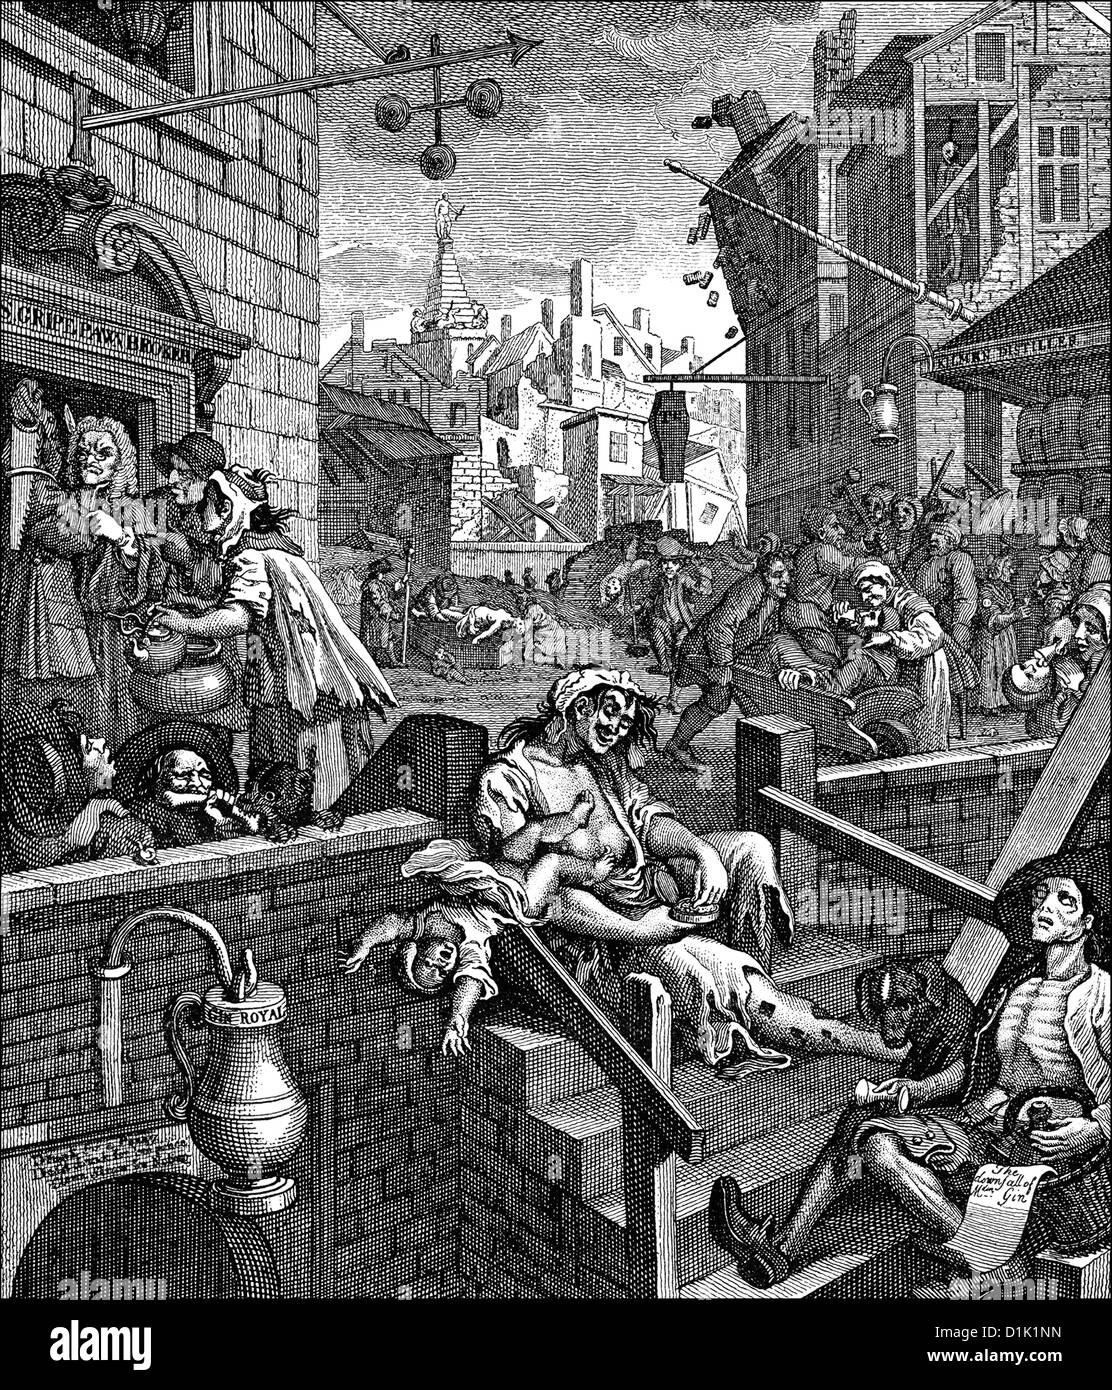 Gin Lane or Liquor Alley, a caricature, symbolic image on alcoholism in the 18th century in England, by William Hogarth, 1697 - Stock Photo